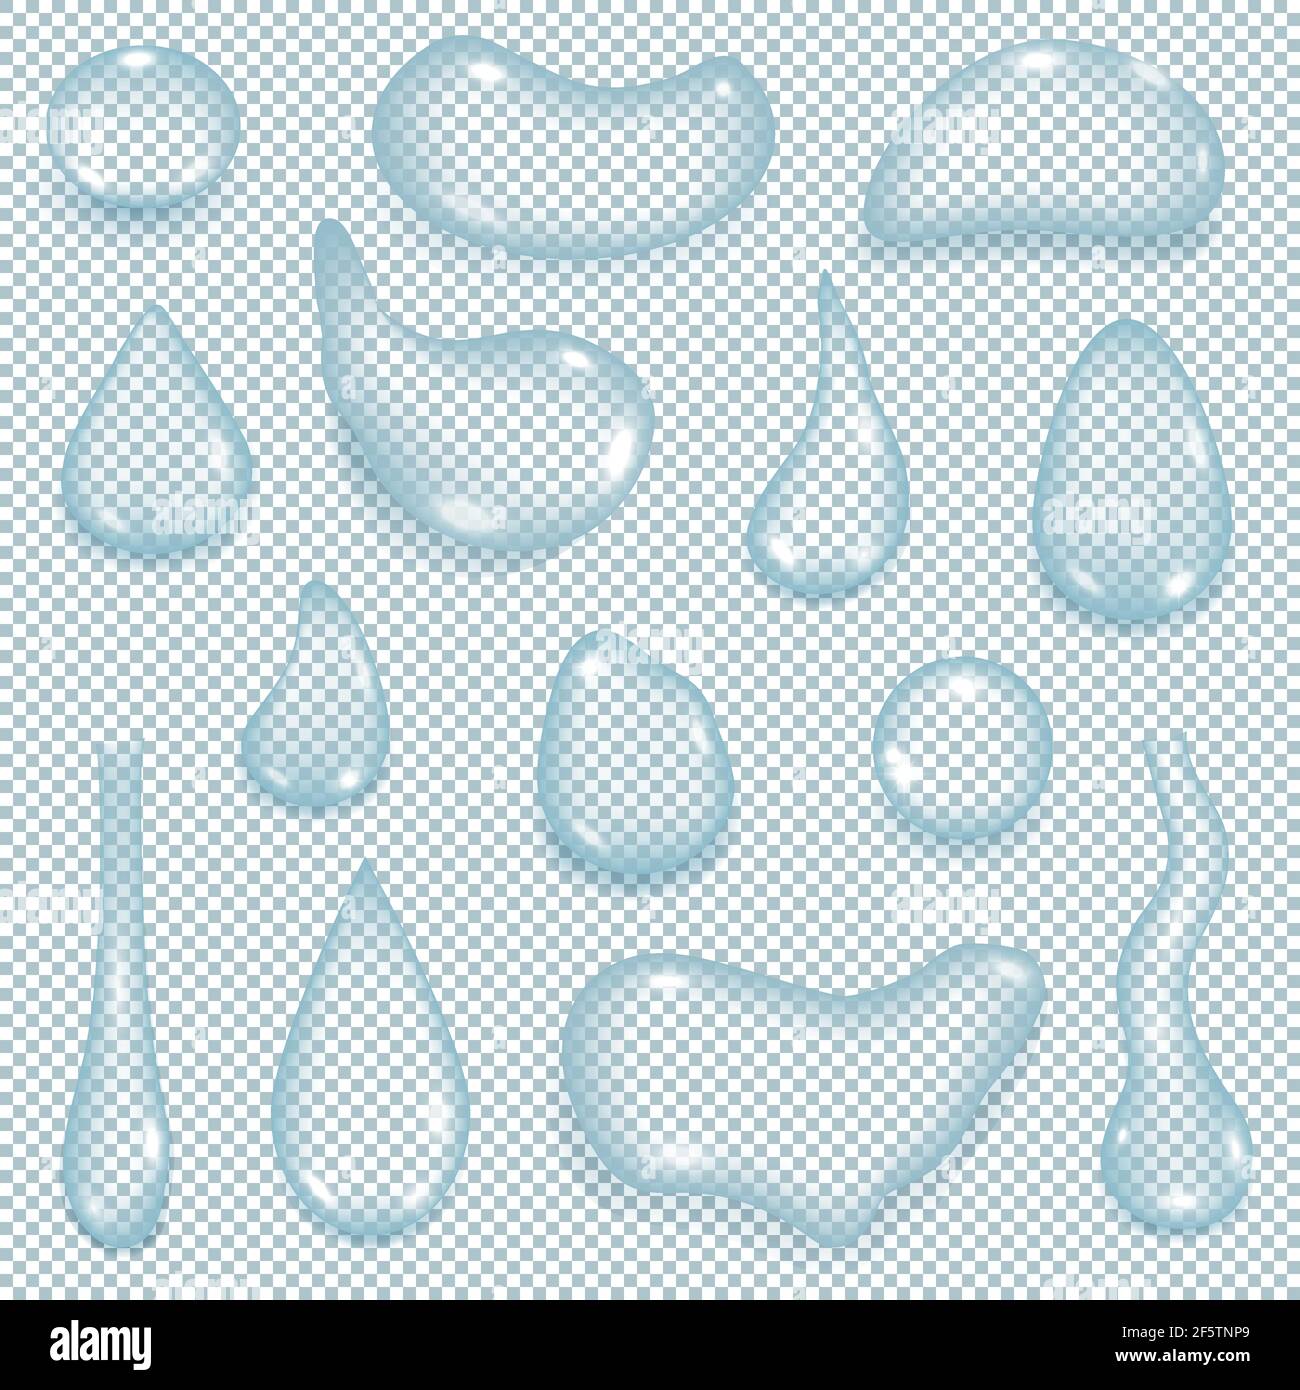 Raindrops Sketch Vector Images (over 700)